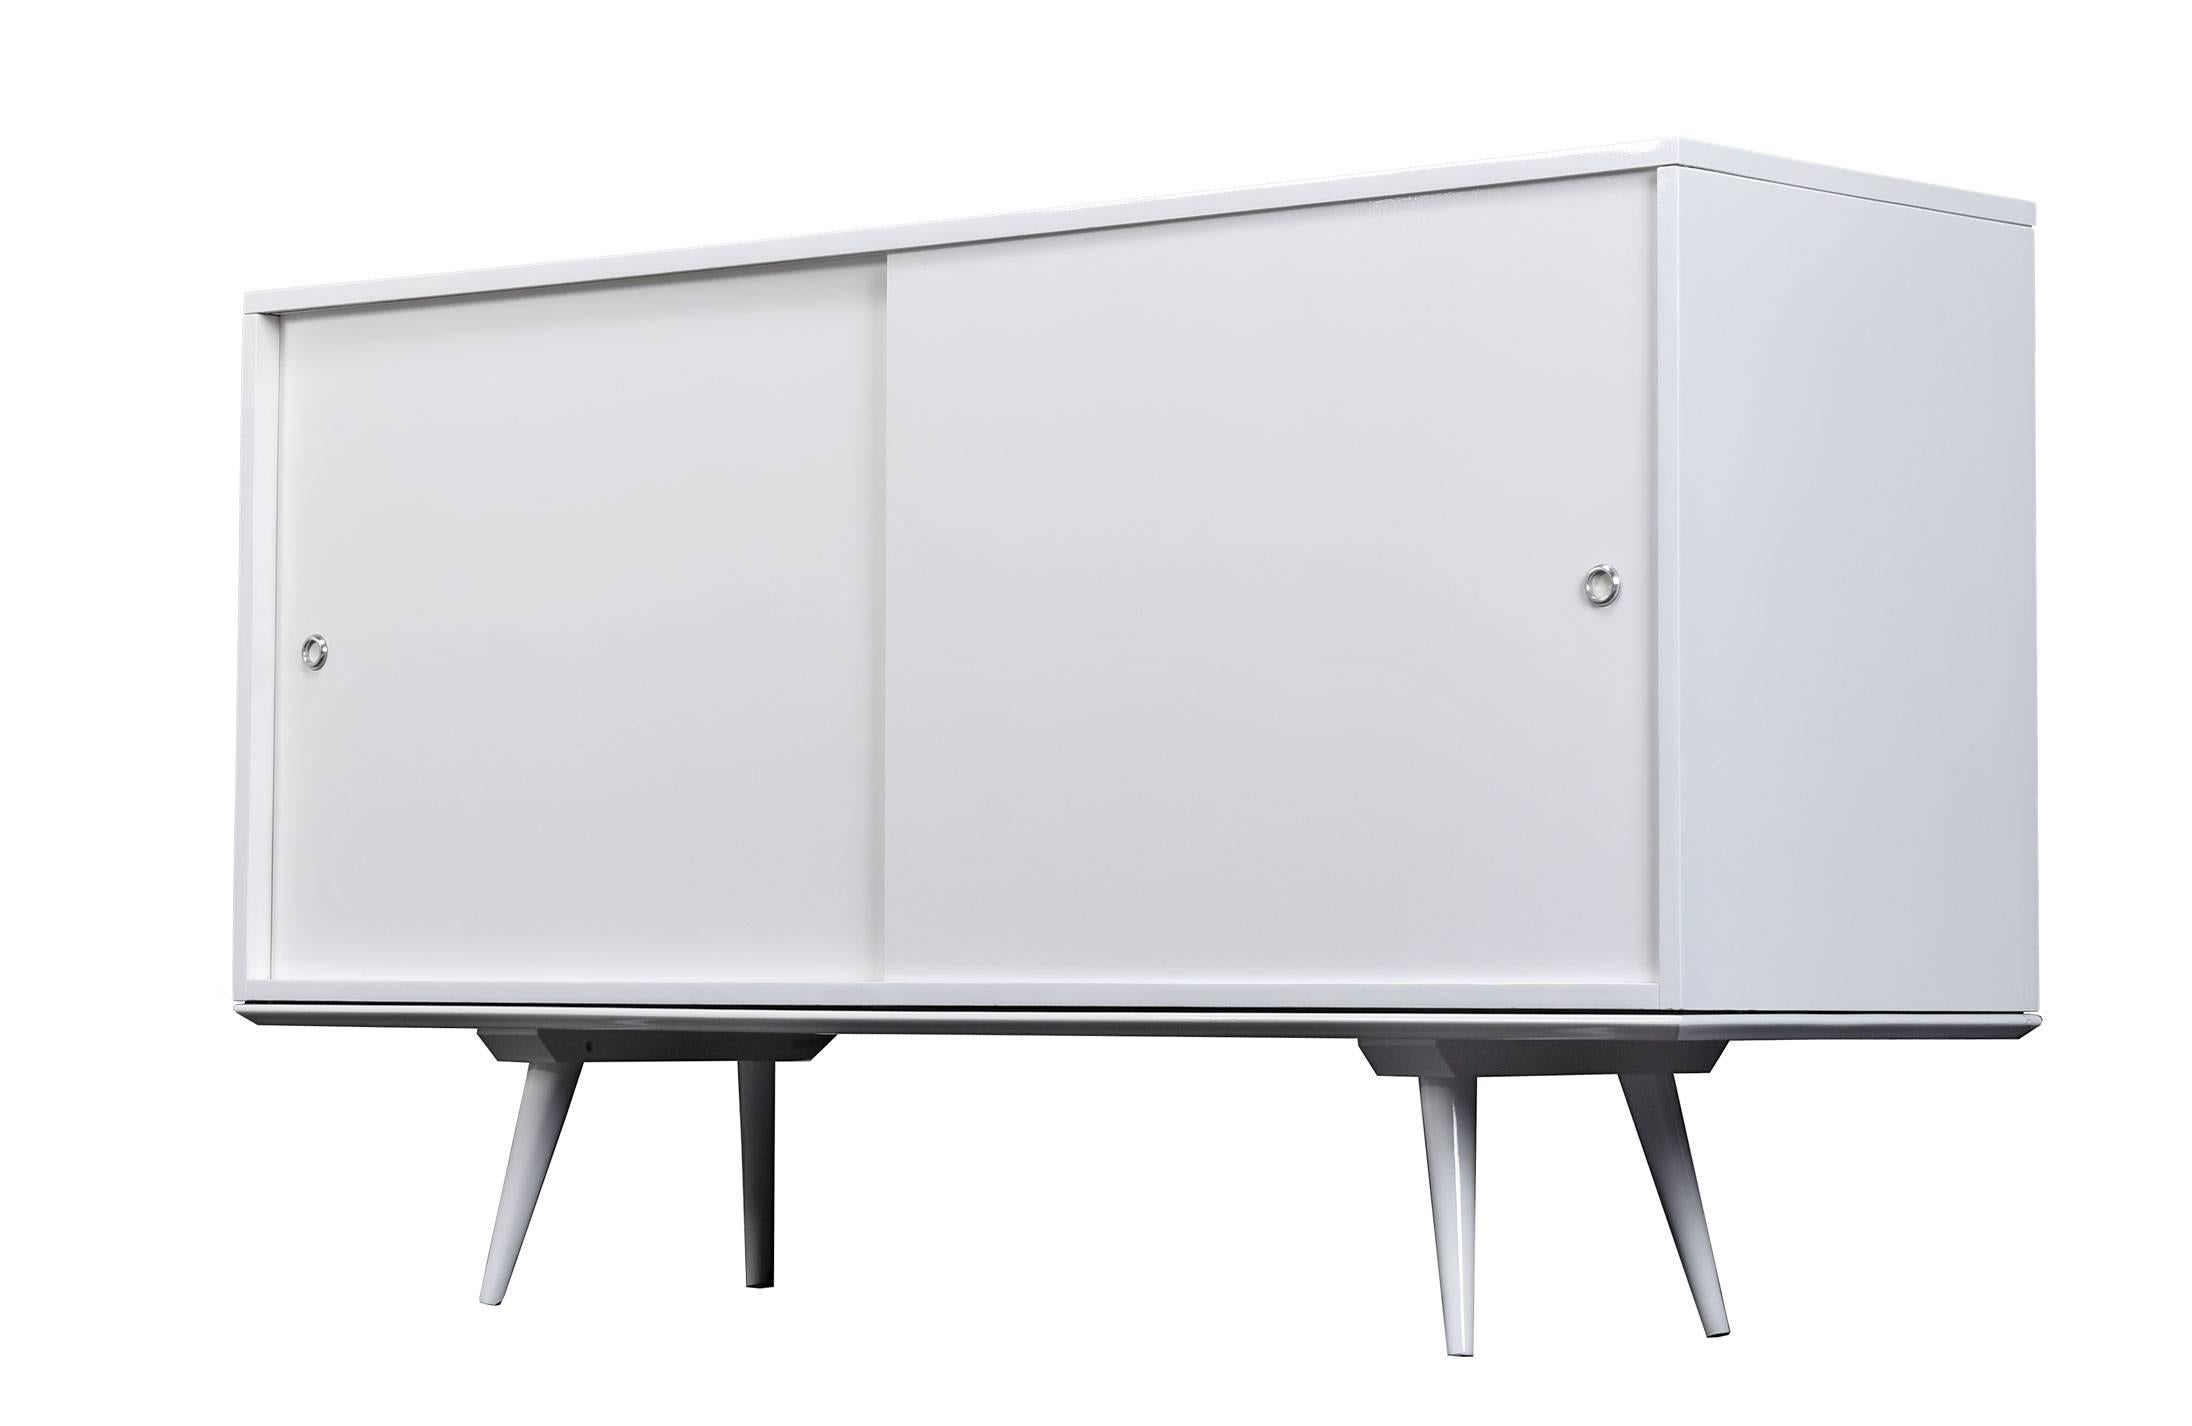 Mid-Century Modern two-piece credenza by Paul McCobb for Planner Group. This unit has been completely, professionally painted in Imron white laquer by an automotive paint shop. The cabinet rests on top of a separate platform base. Features (2) large